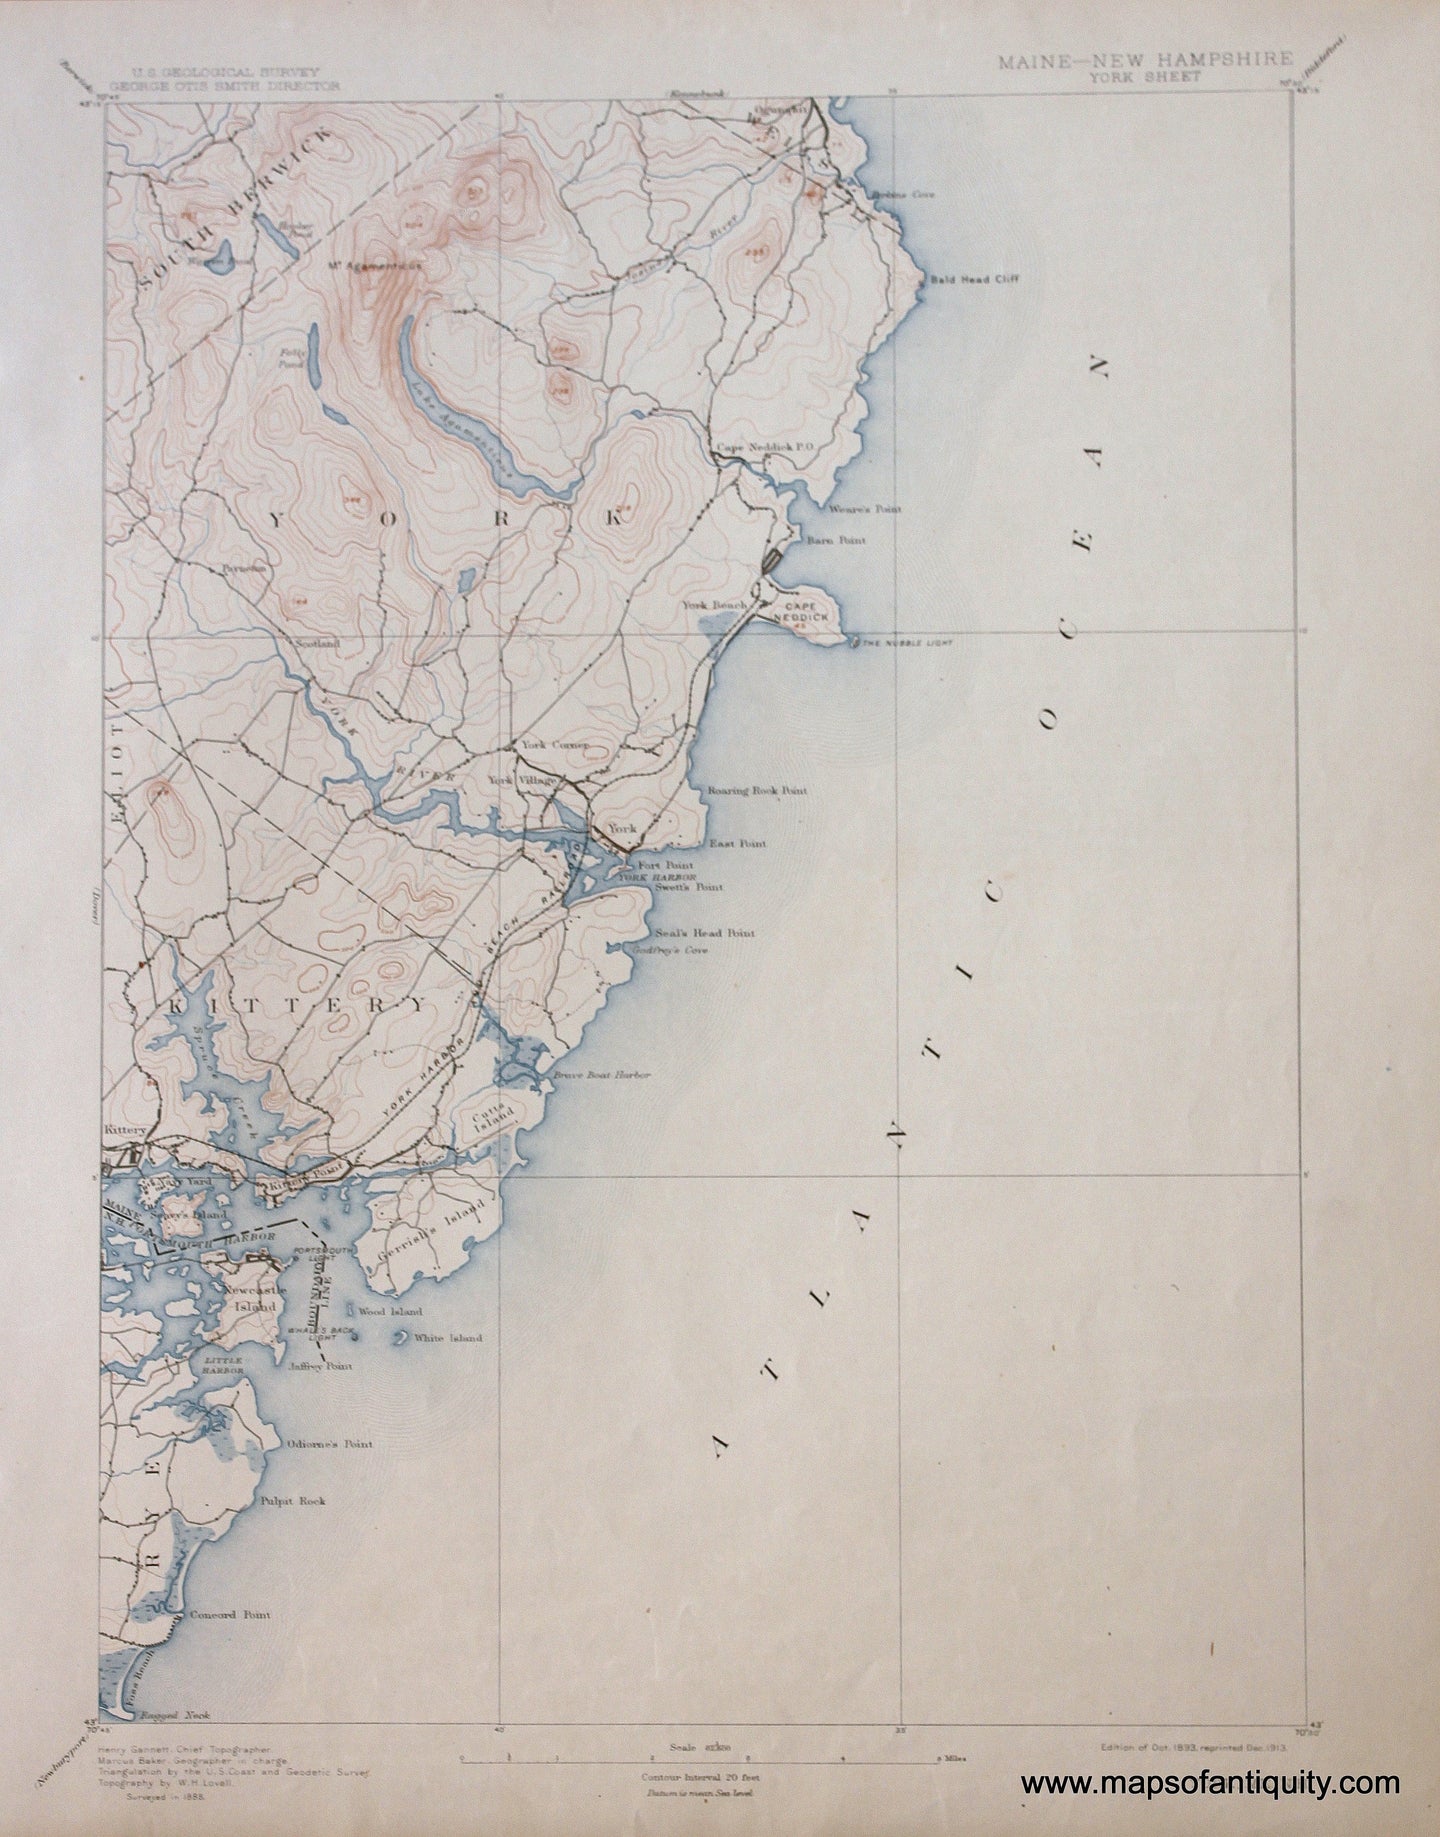 Genuine-Antique-Map-York-Maine-New-Hampshire--1913-US-Geological-Survey--Maps-Of-Antiquity